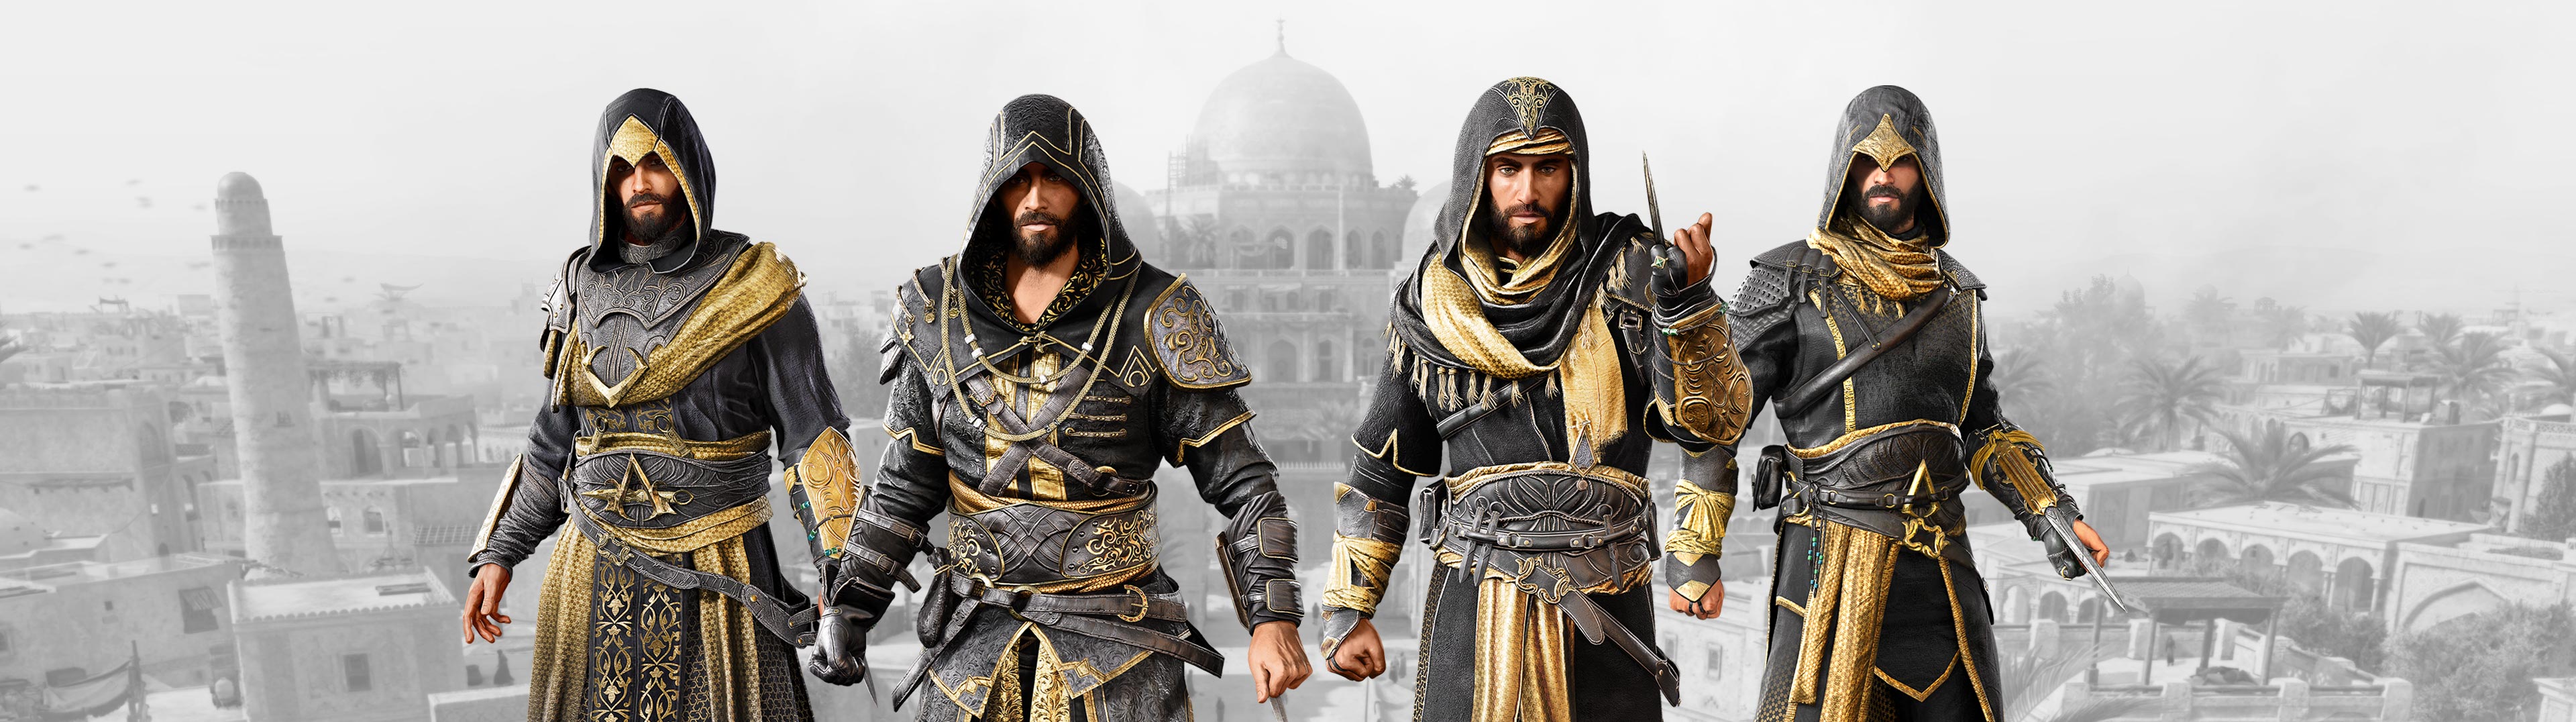 Assassin's Creed Mirage Master Assassin Pack for PC Buy